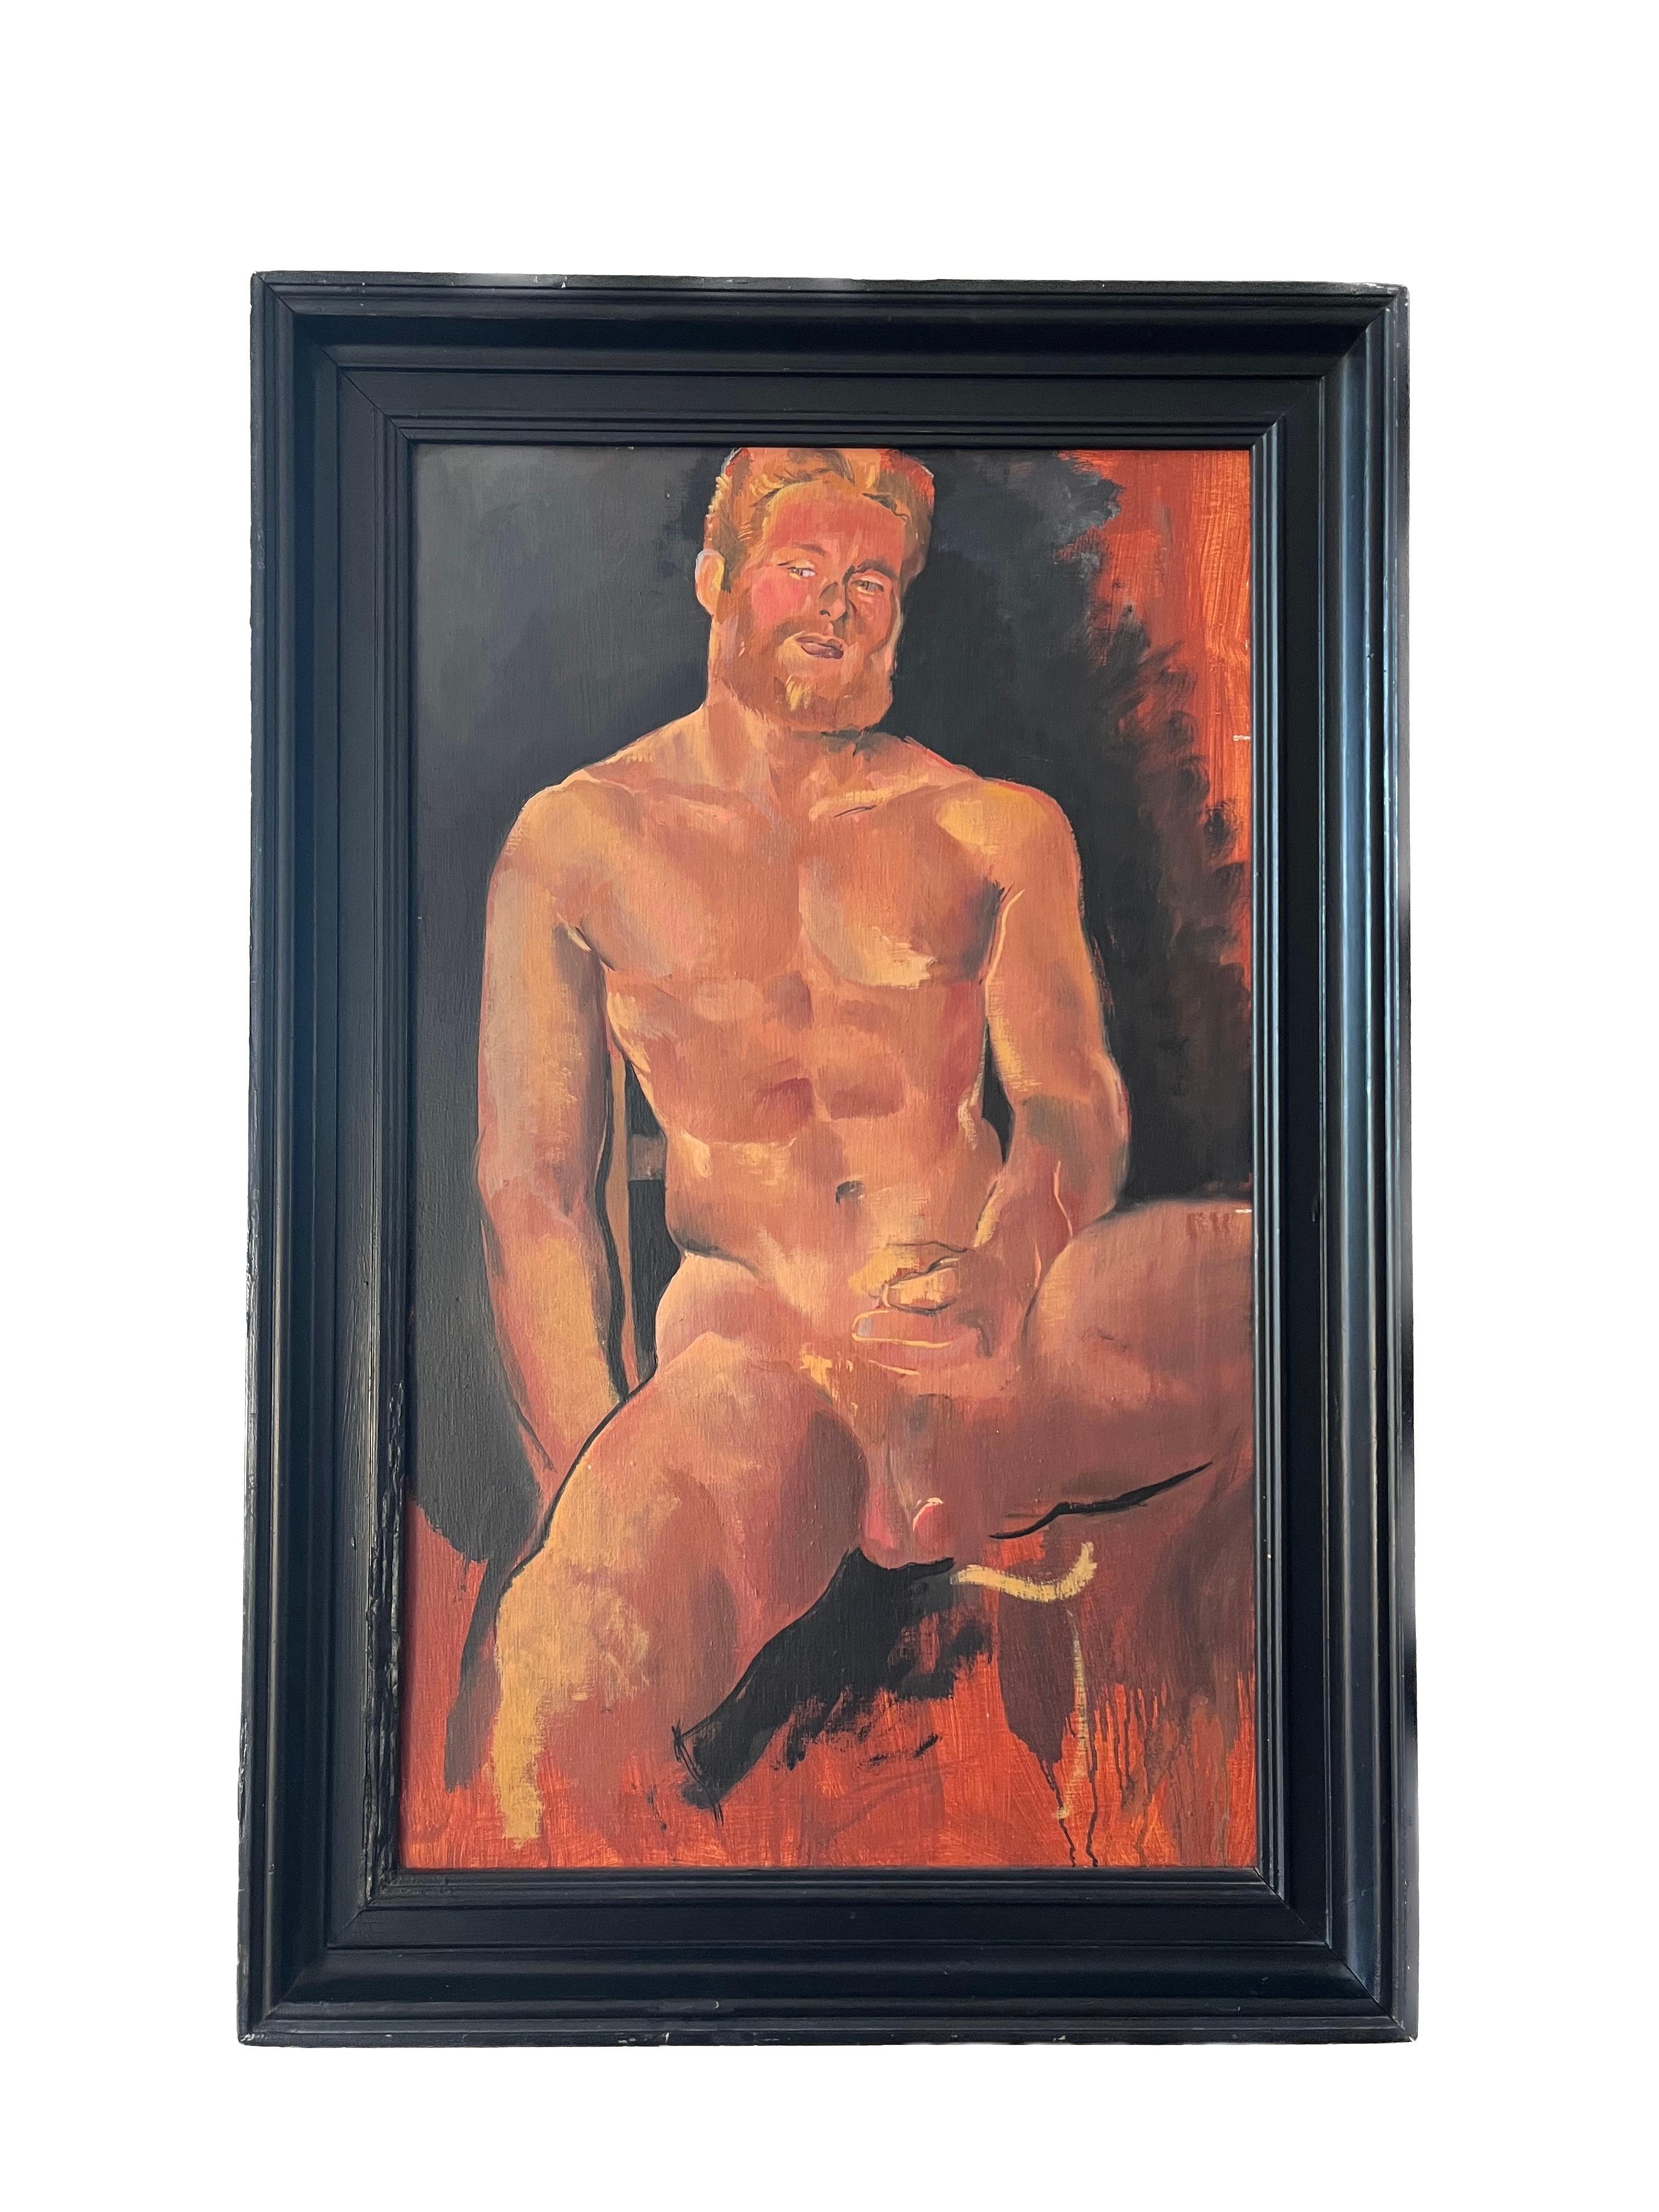 Philip Core Portrait Painting - 1980s Erotic nude male portrait of artist's lover, Iconic piece from gay history